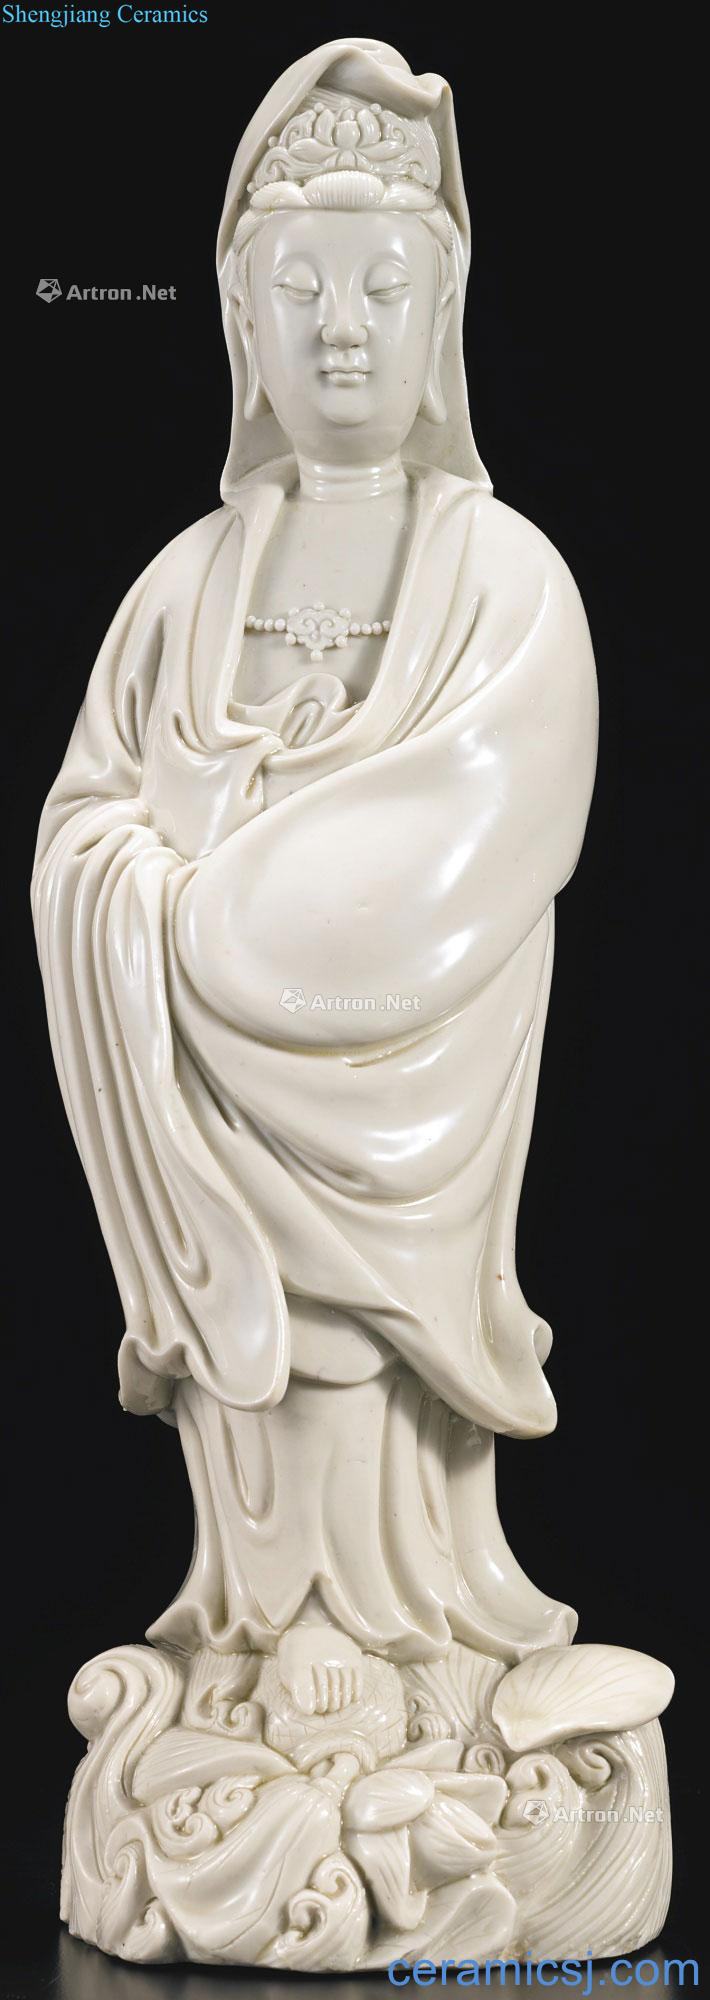 The late Ming about 1620 years Dehua white glaze guanyin stands resemble